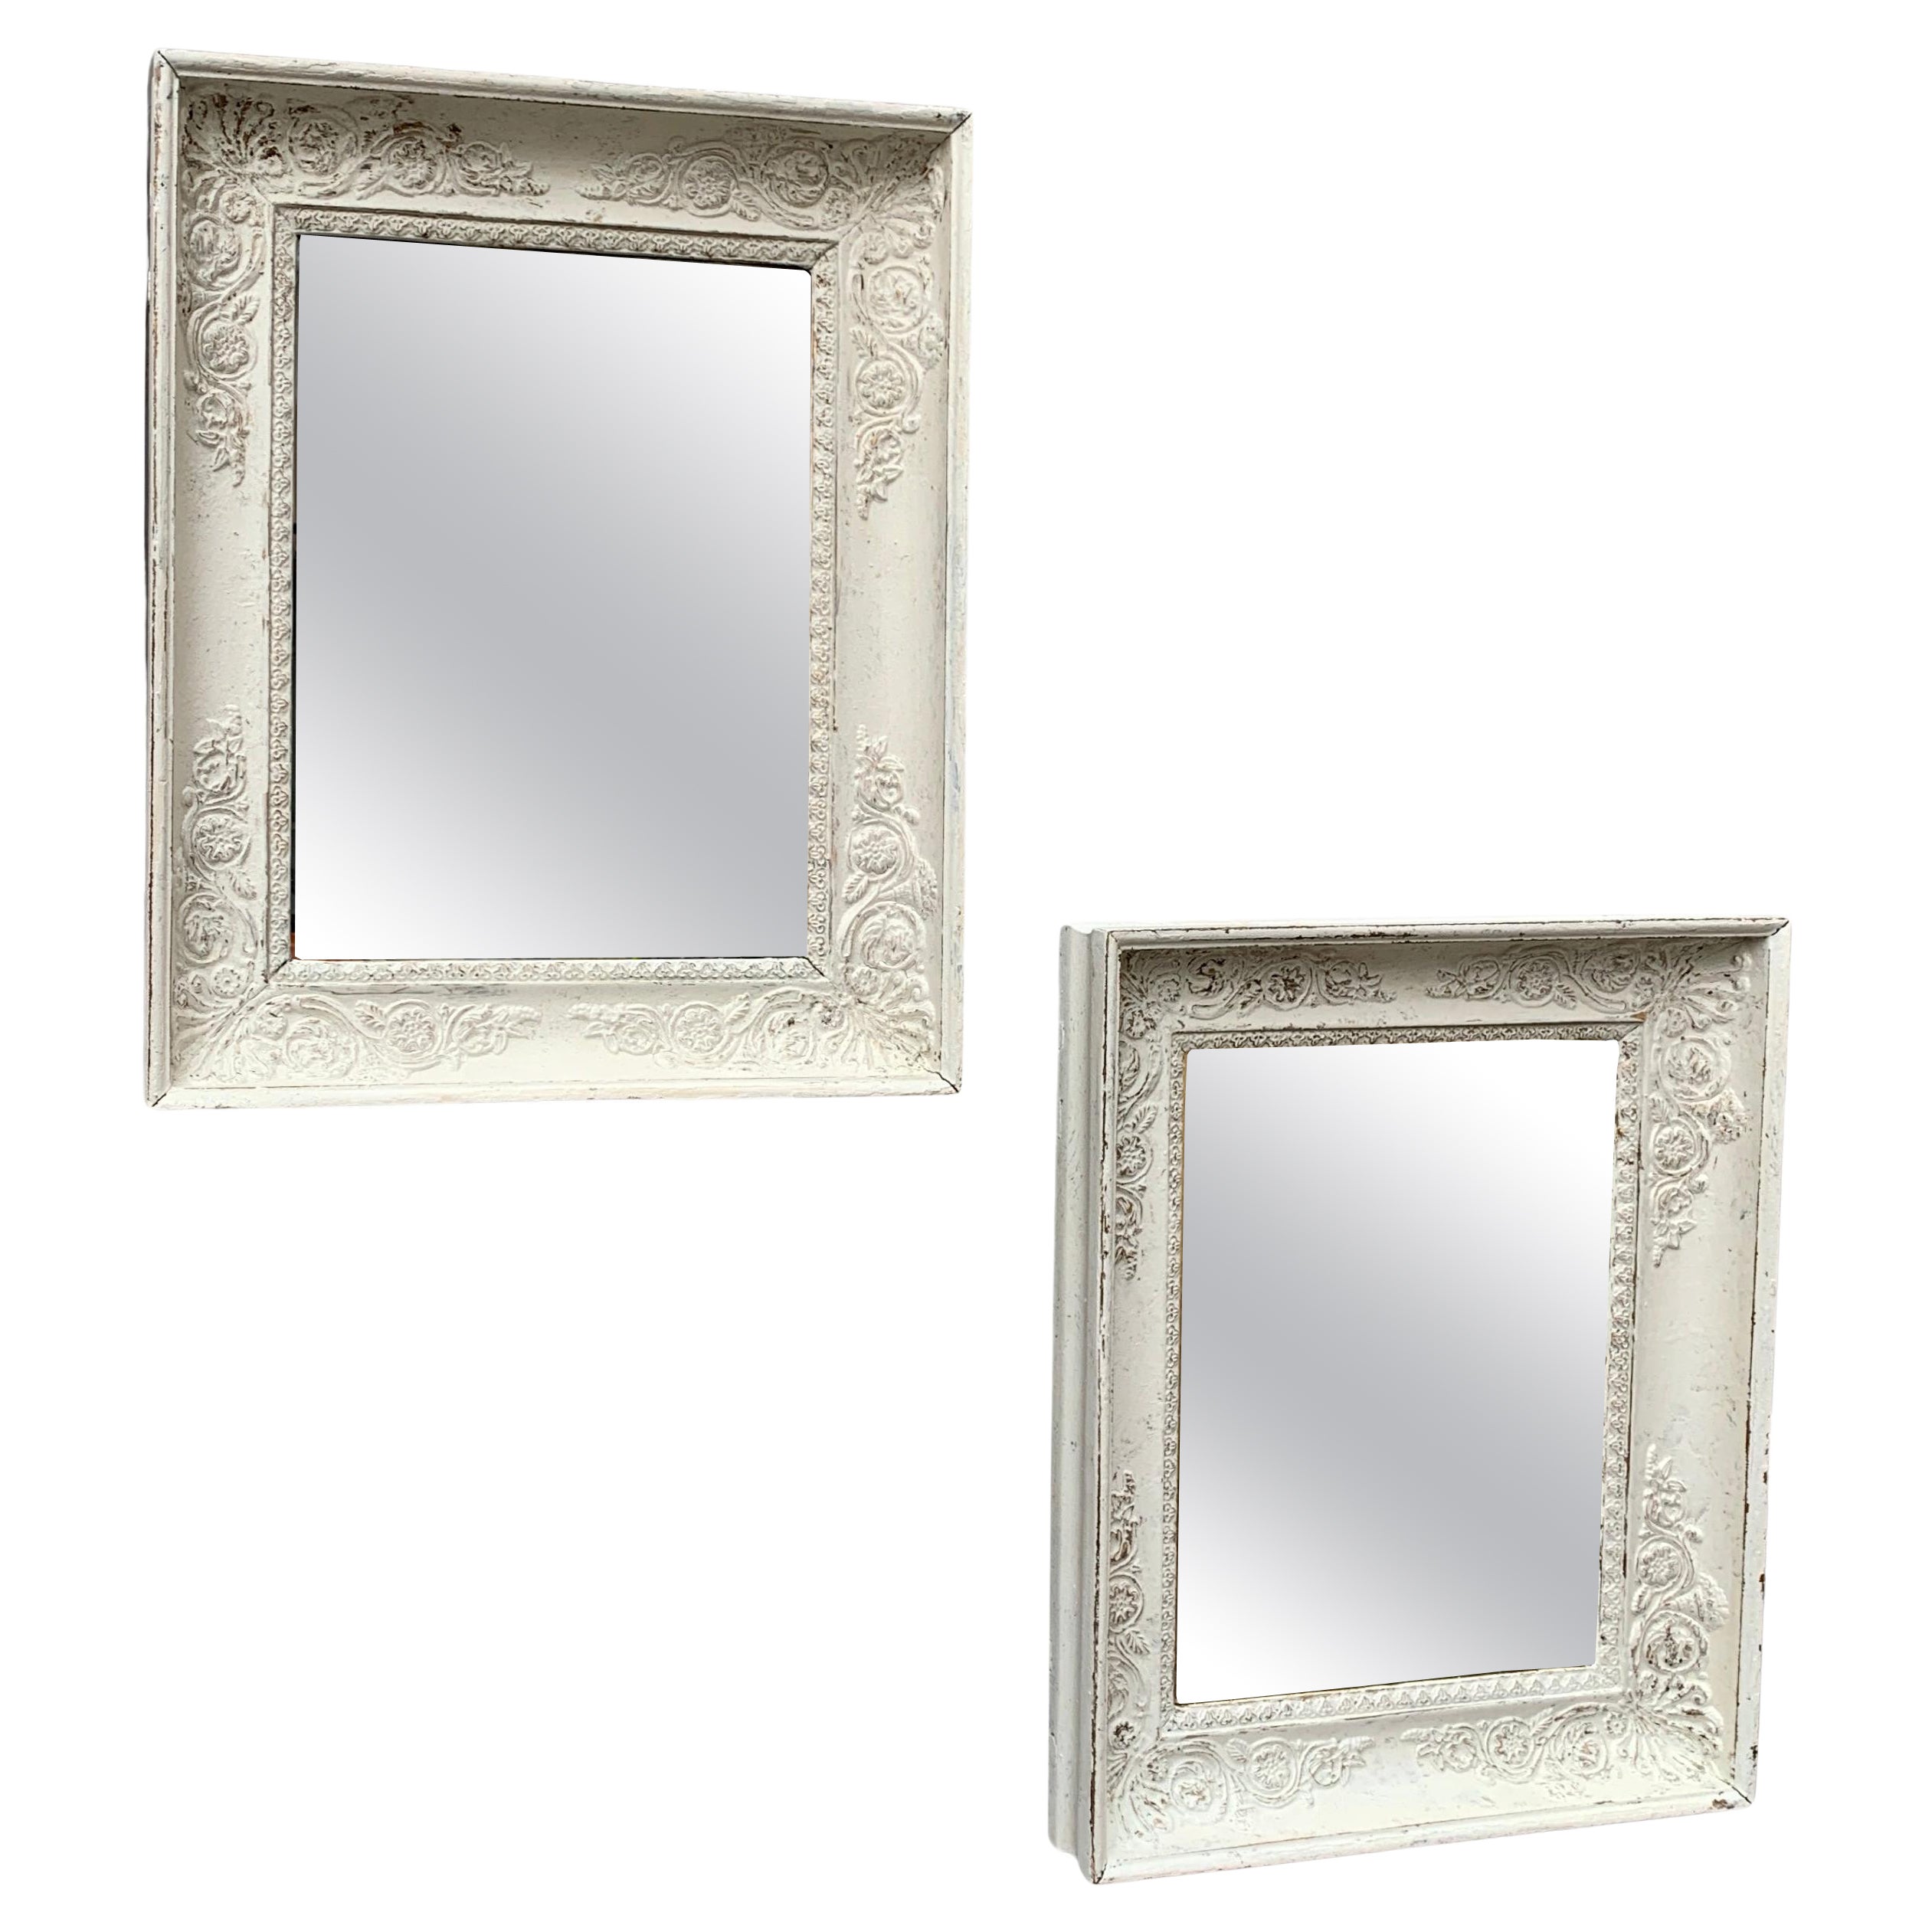 Pair of Small Painted Wall Mirrors, France 19th Century